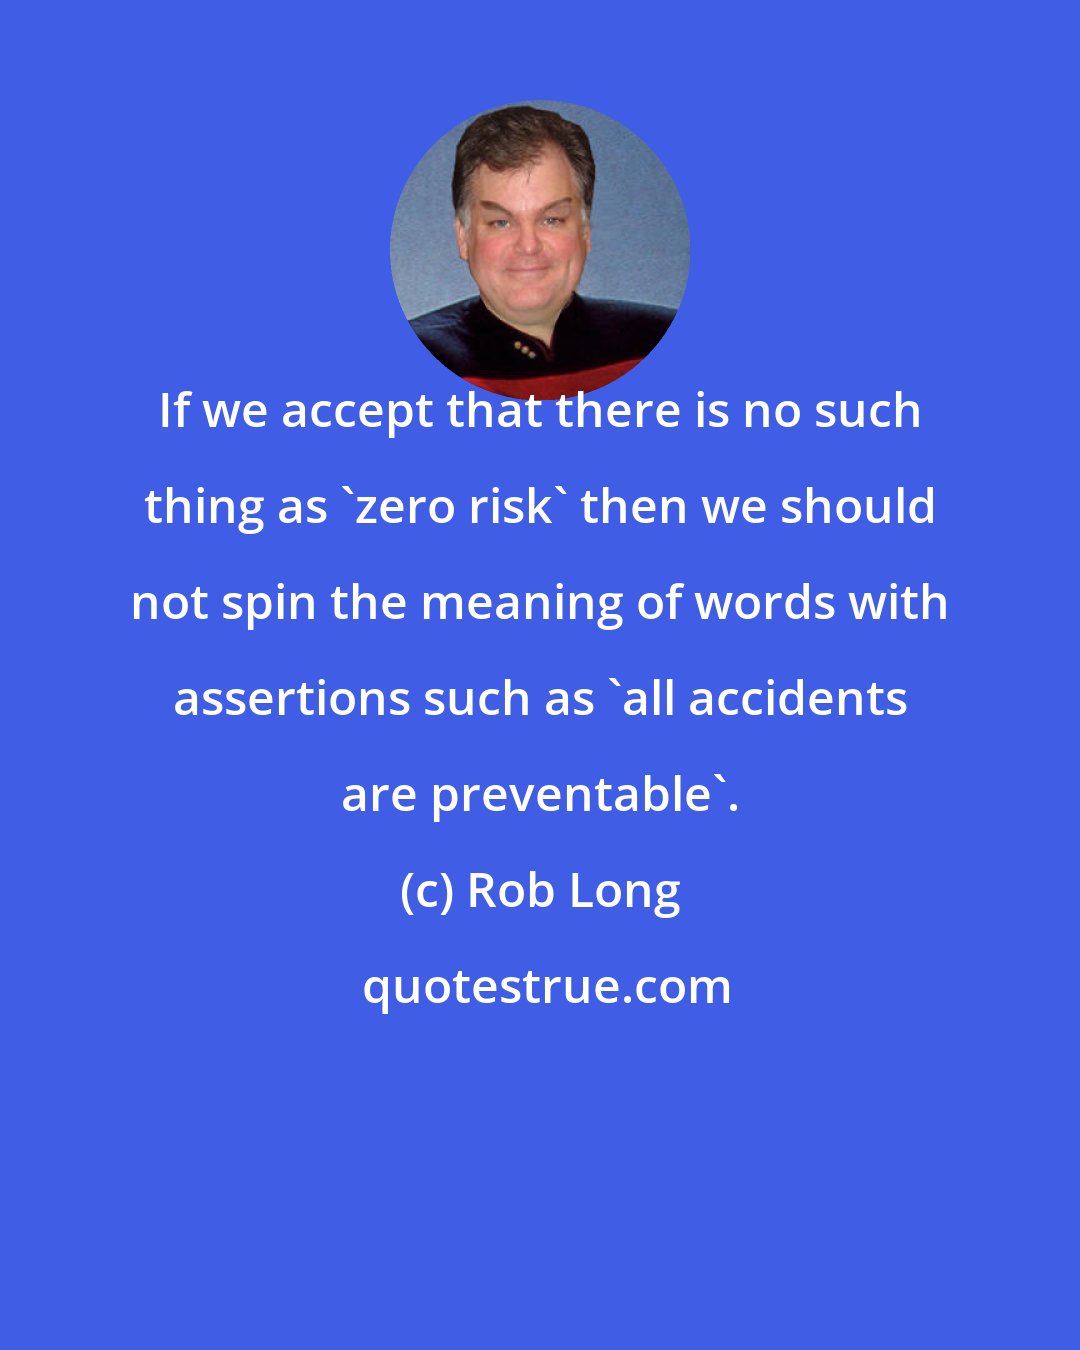 Rob Long: If we accept that there is no such thing as 'zero risk' then we should not spin the meaning of words with assertions such as 'all accidents are preventable'.